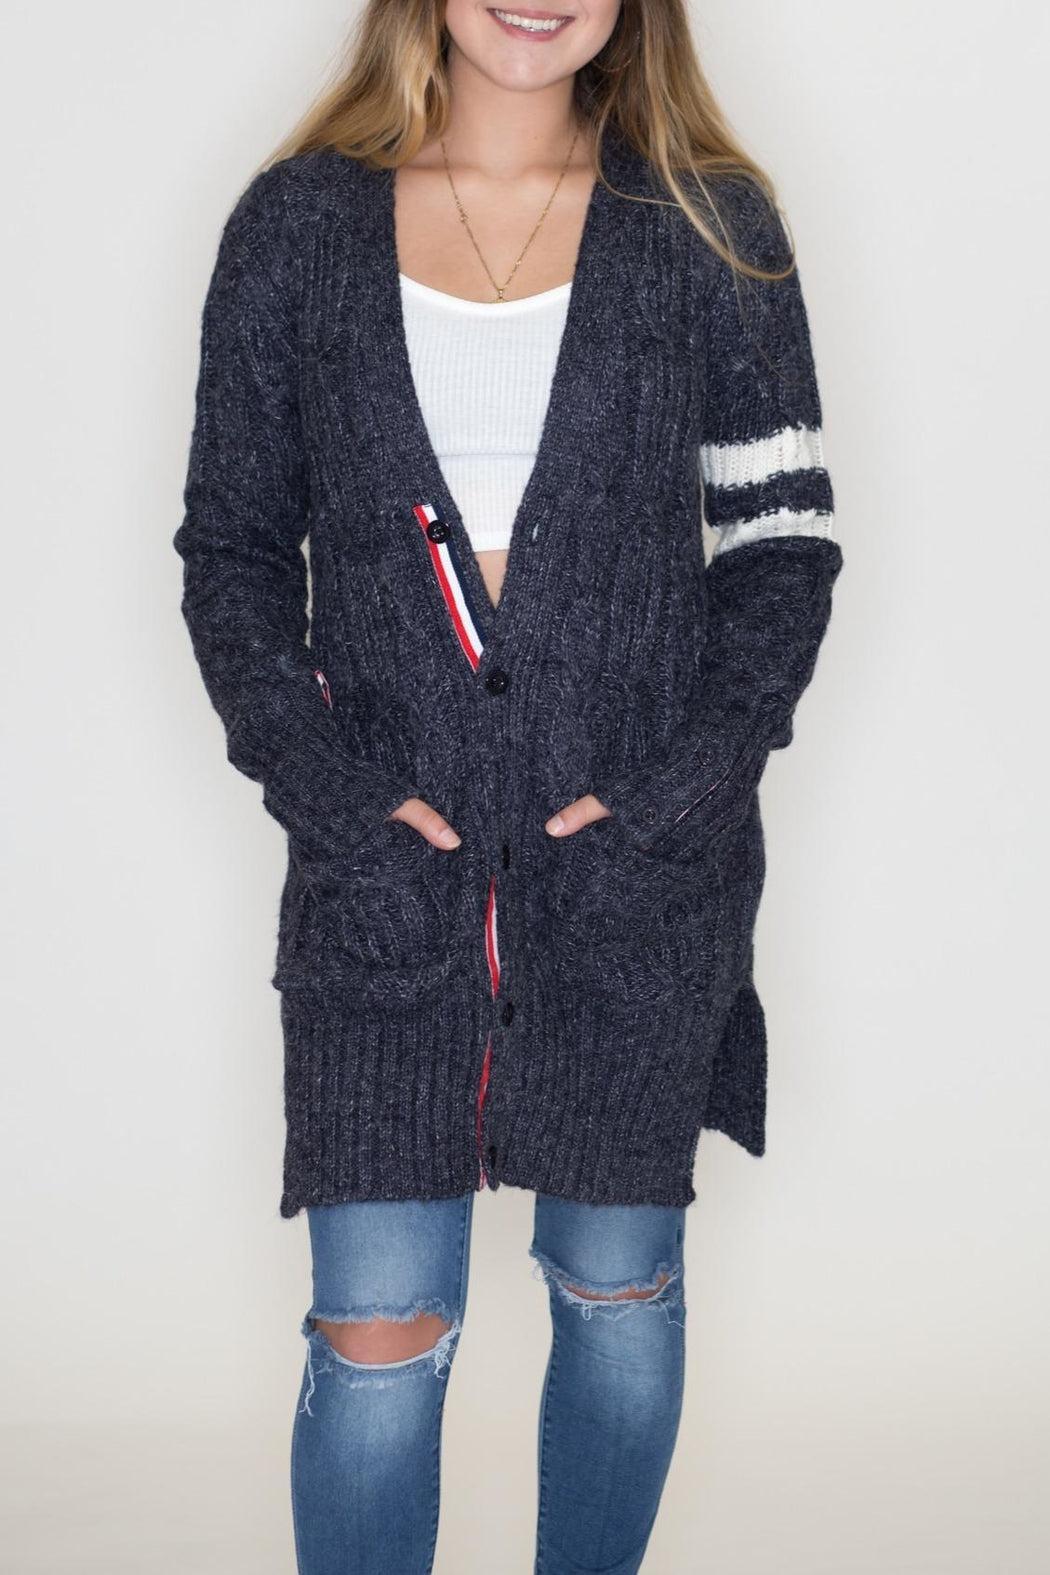 Cable Knit Cardigan Product Image